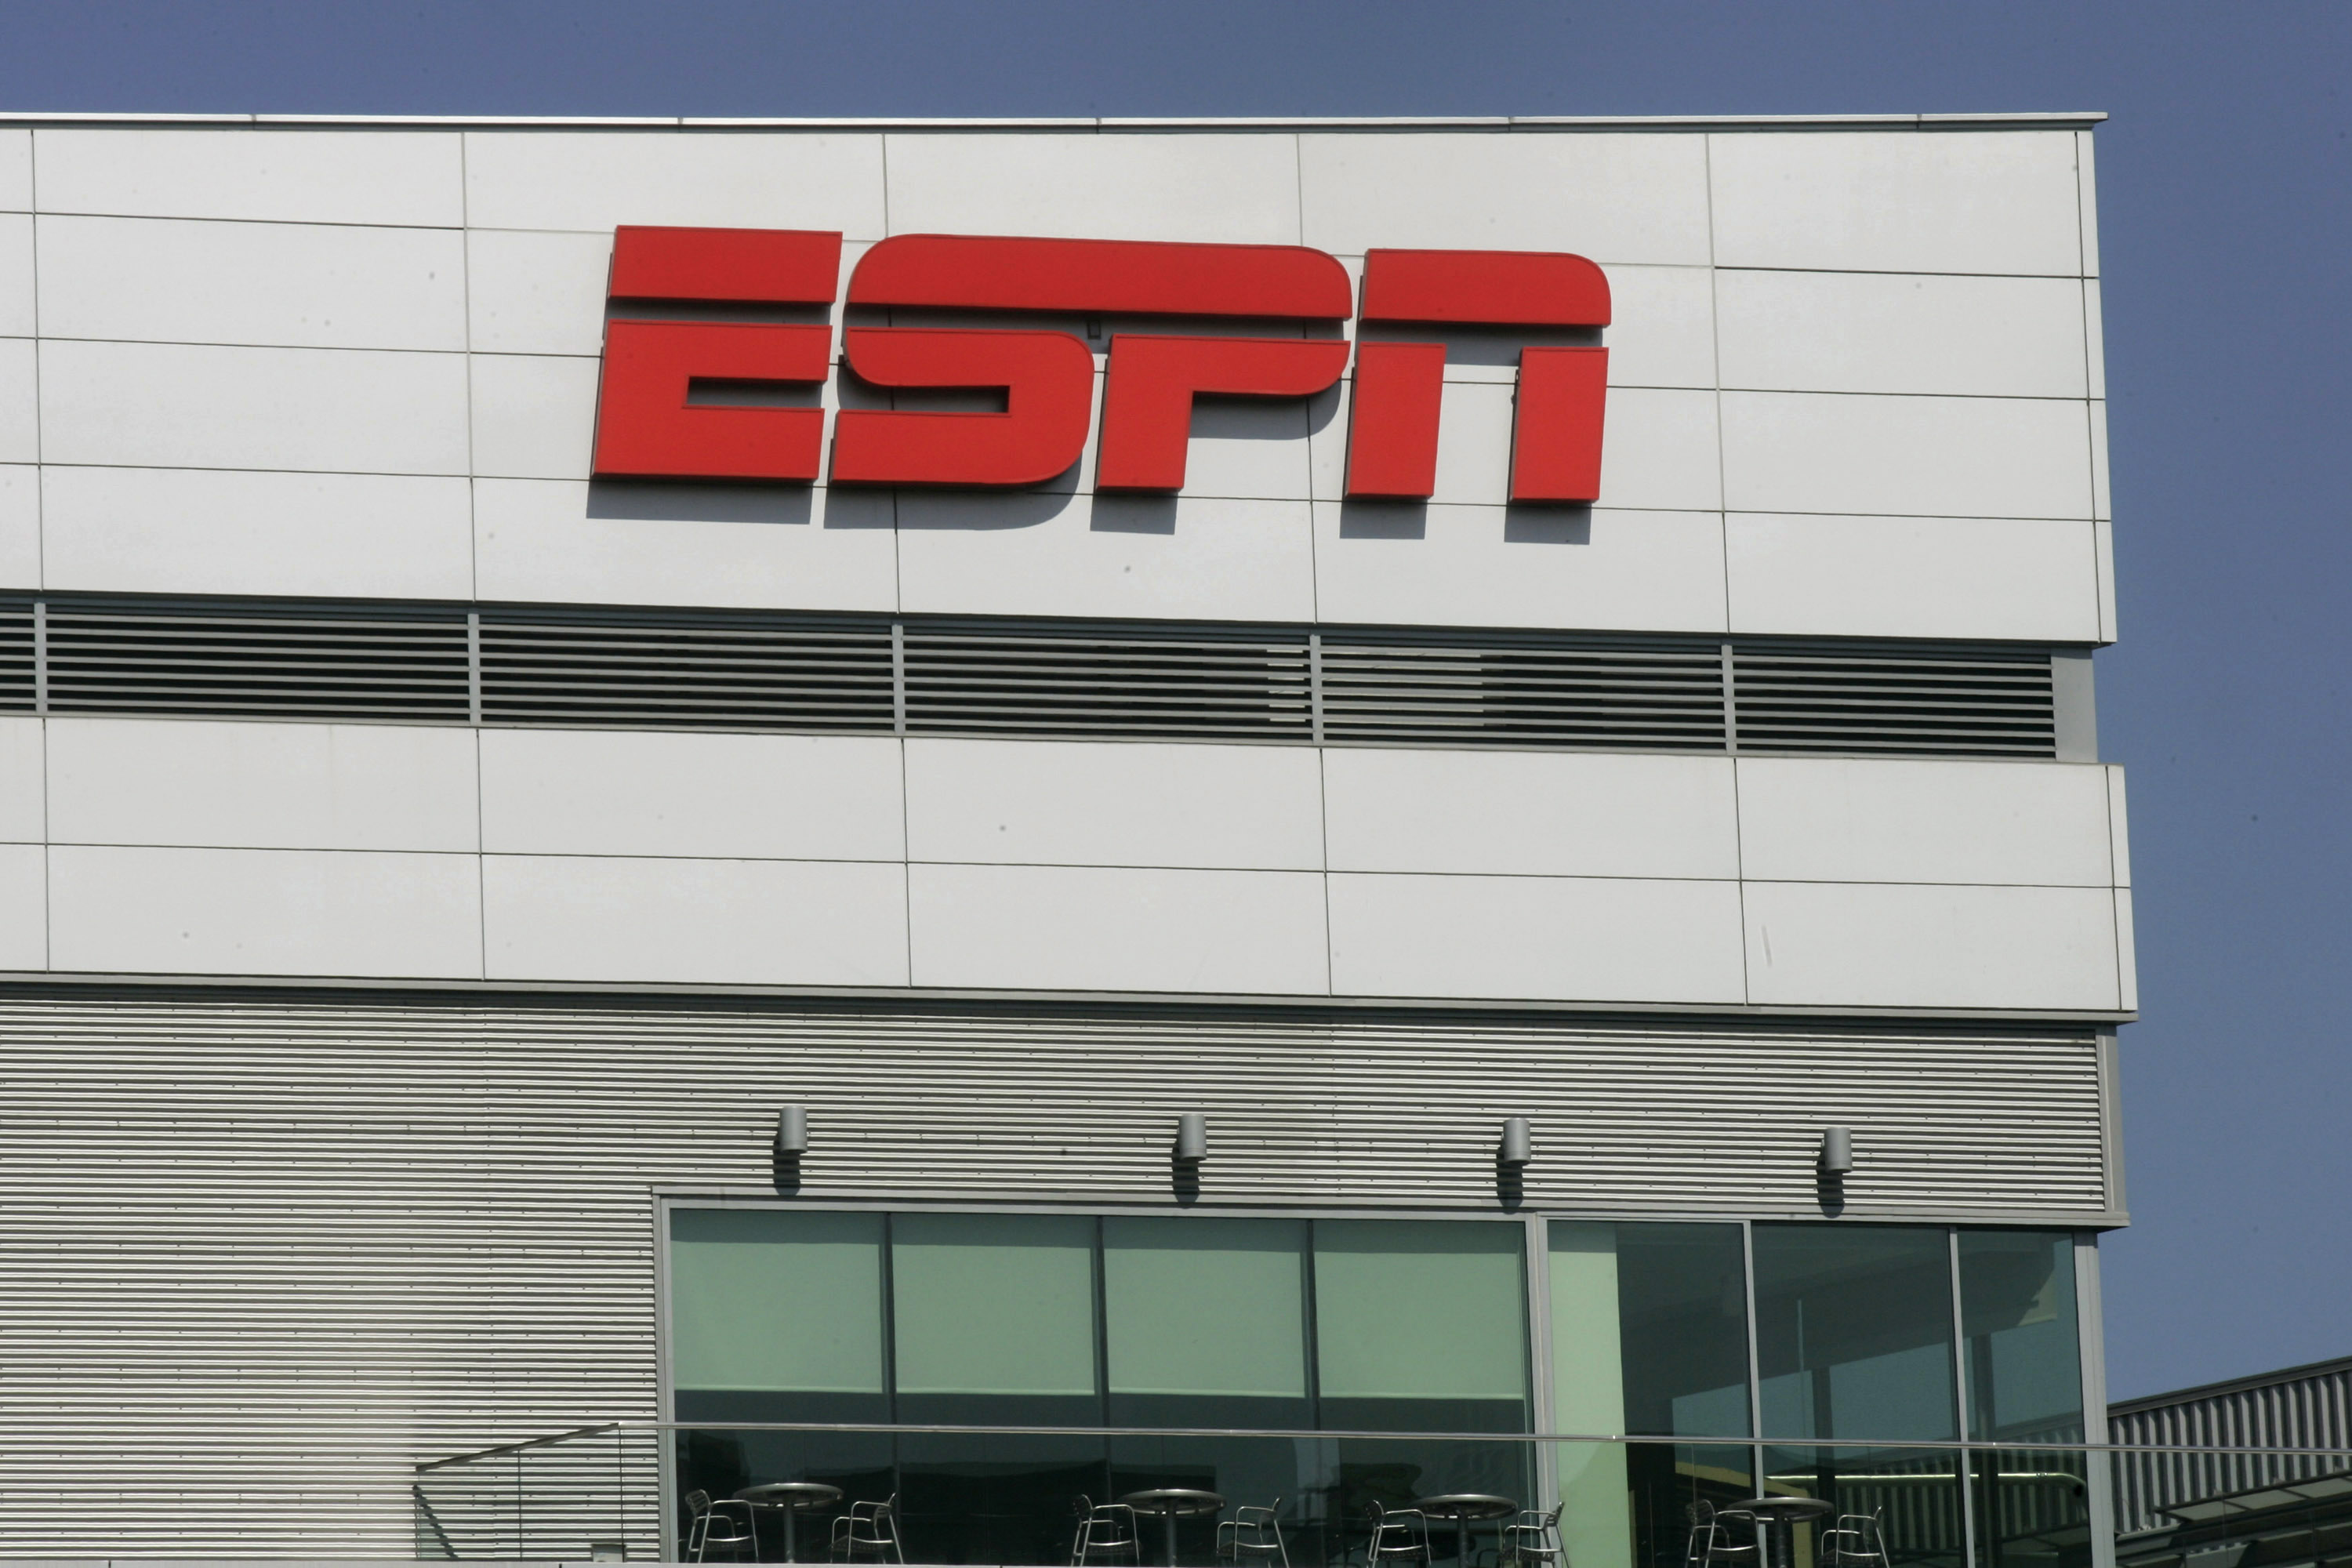 The ESPN logo is displayed outside L.A. Live, which houses the ESPNZone, in Los Angeles, California, U.S., on Tuesday, Aug. 31, 2010. (Getty Images)